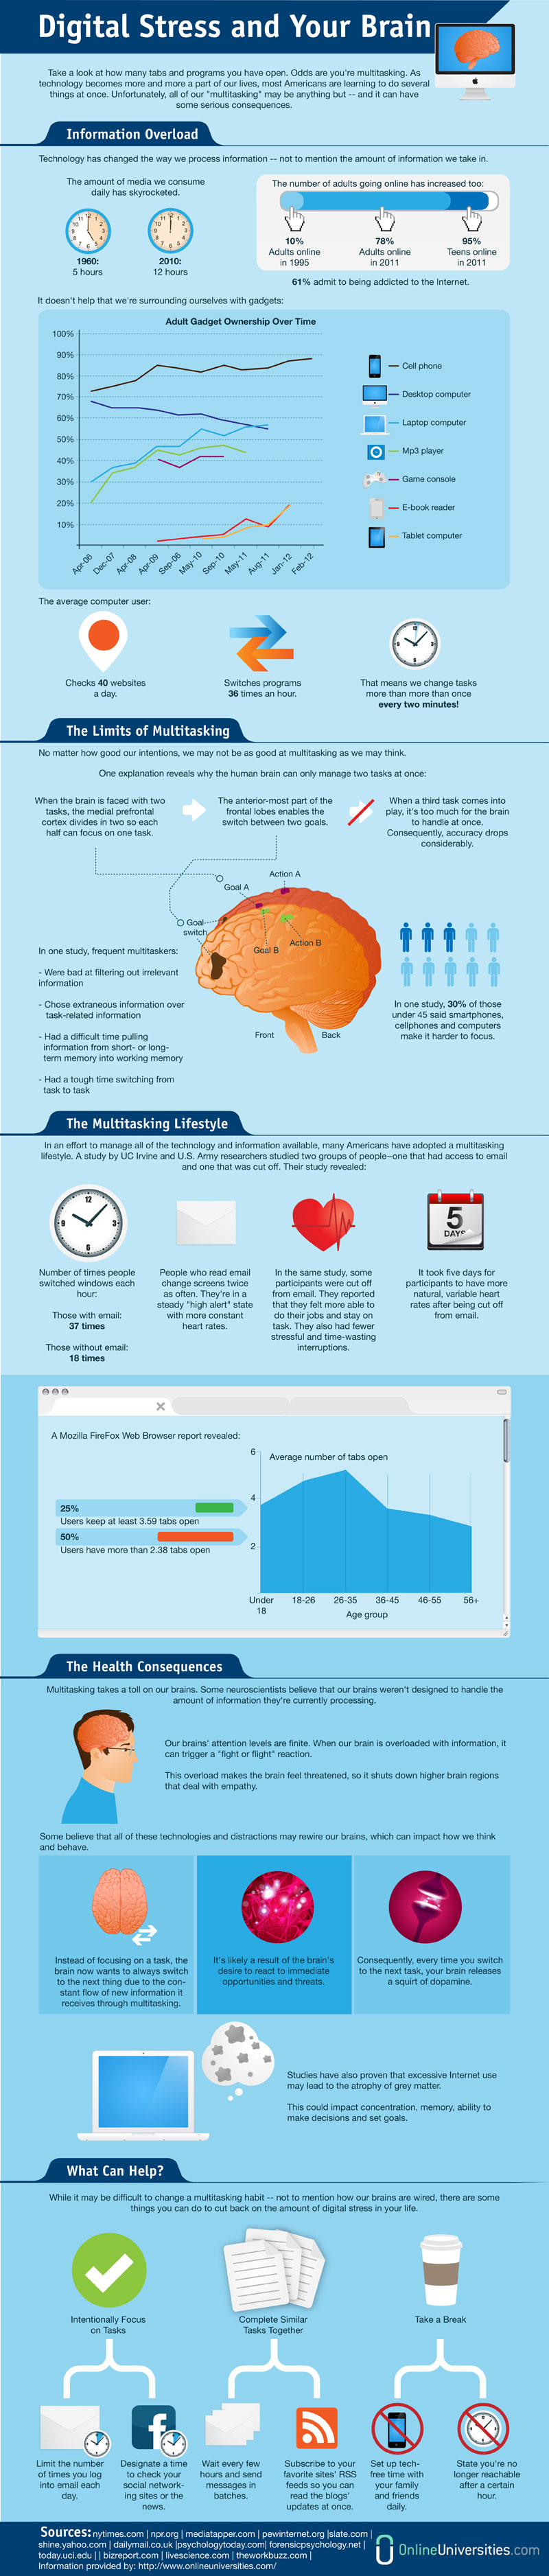 What Digital Stress Does To Your Brain [Infographic]